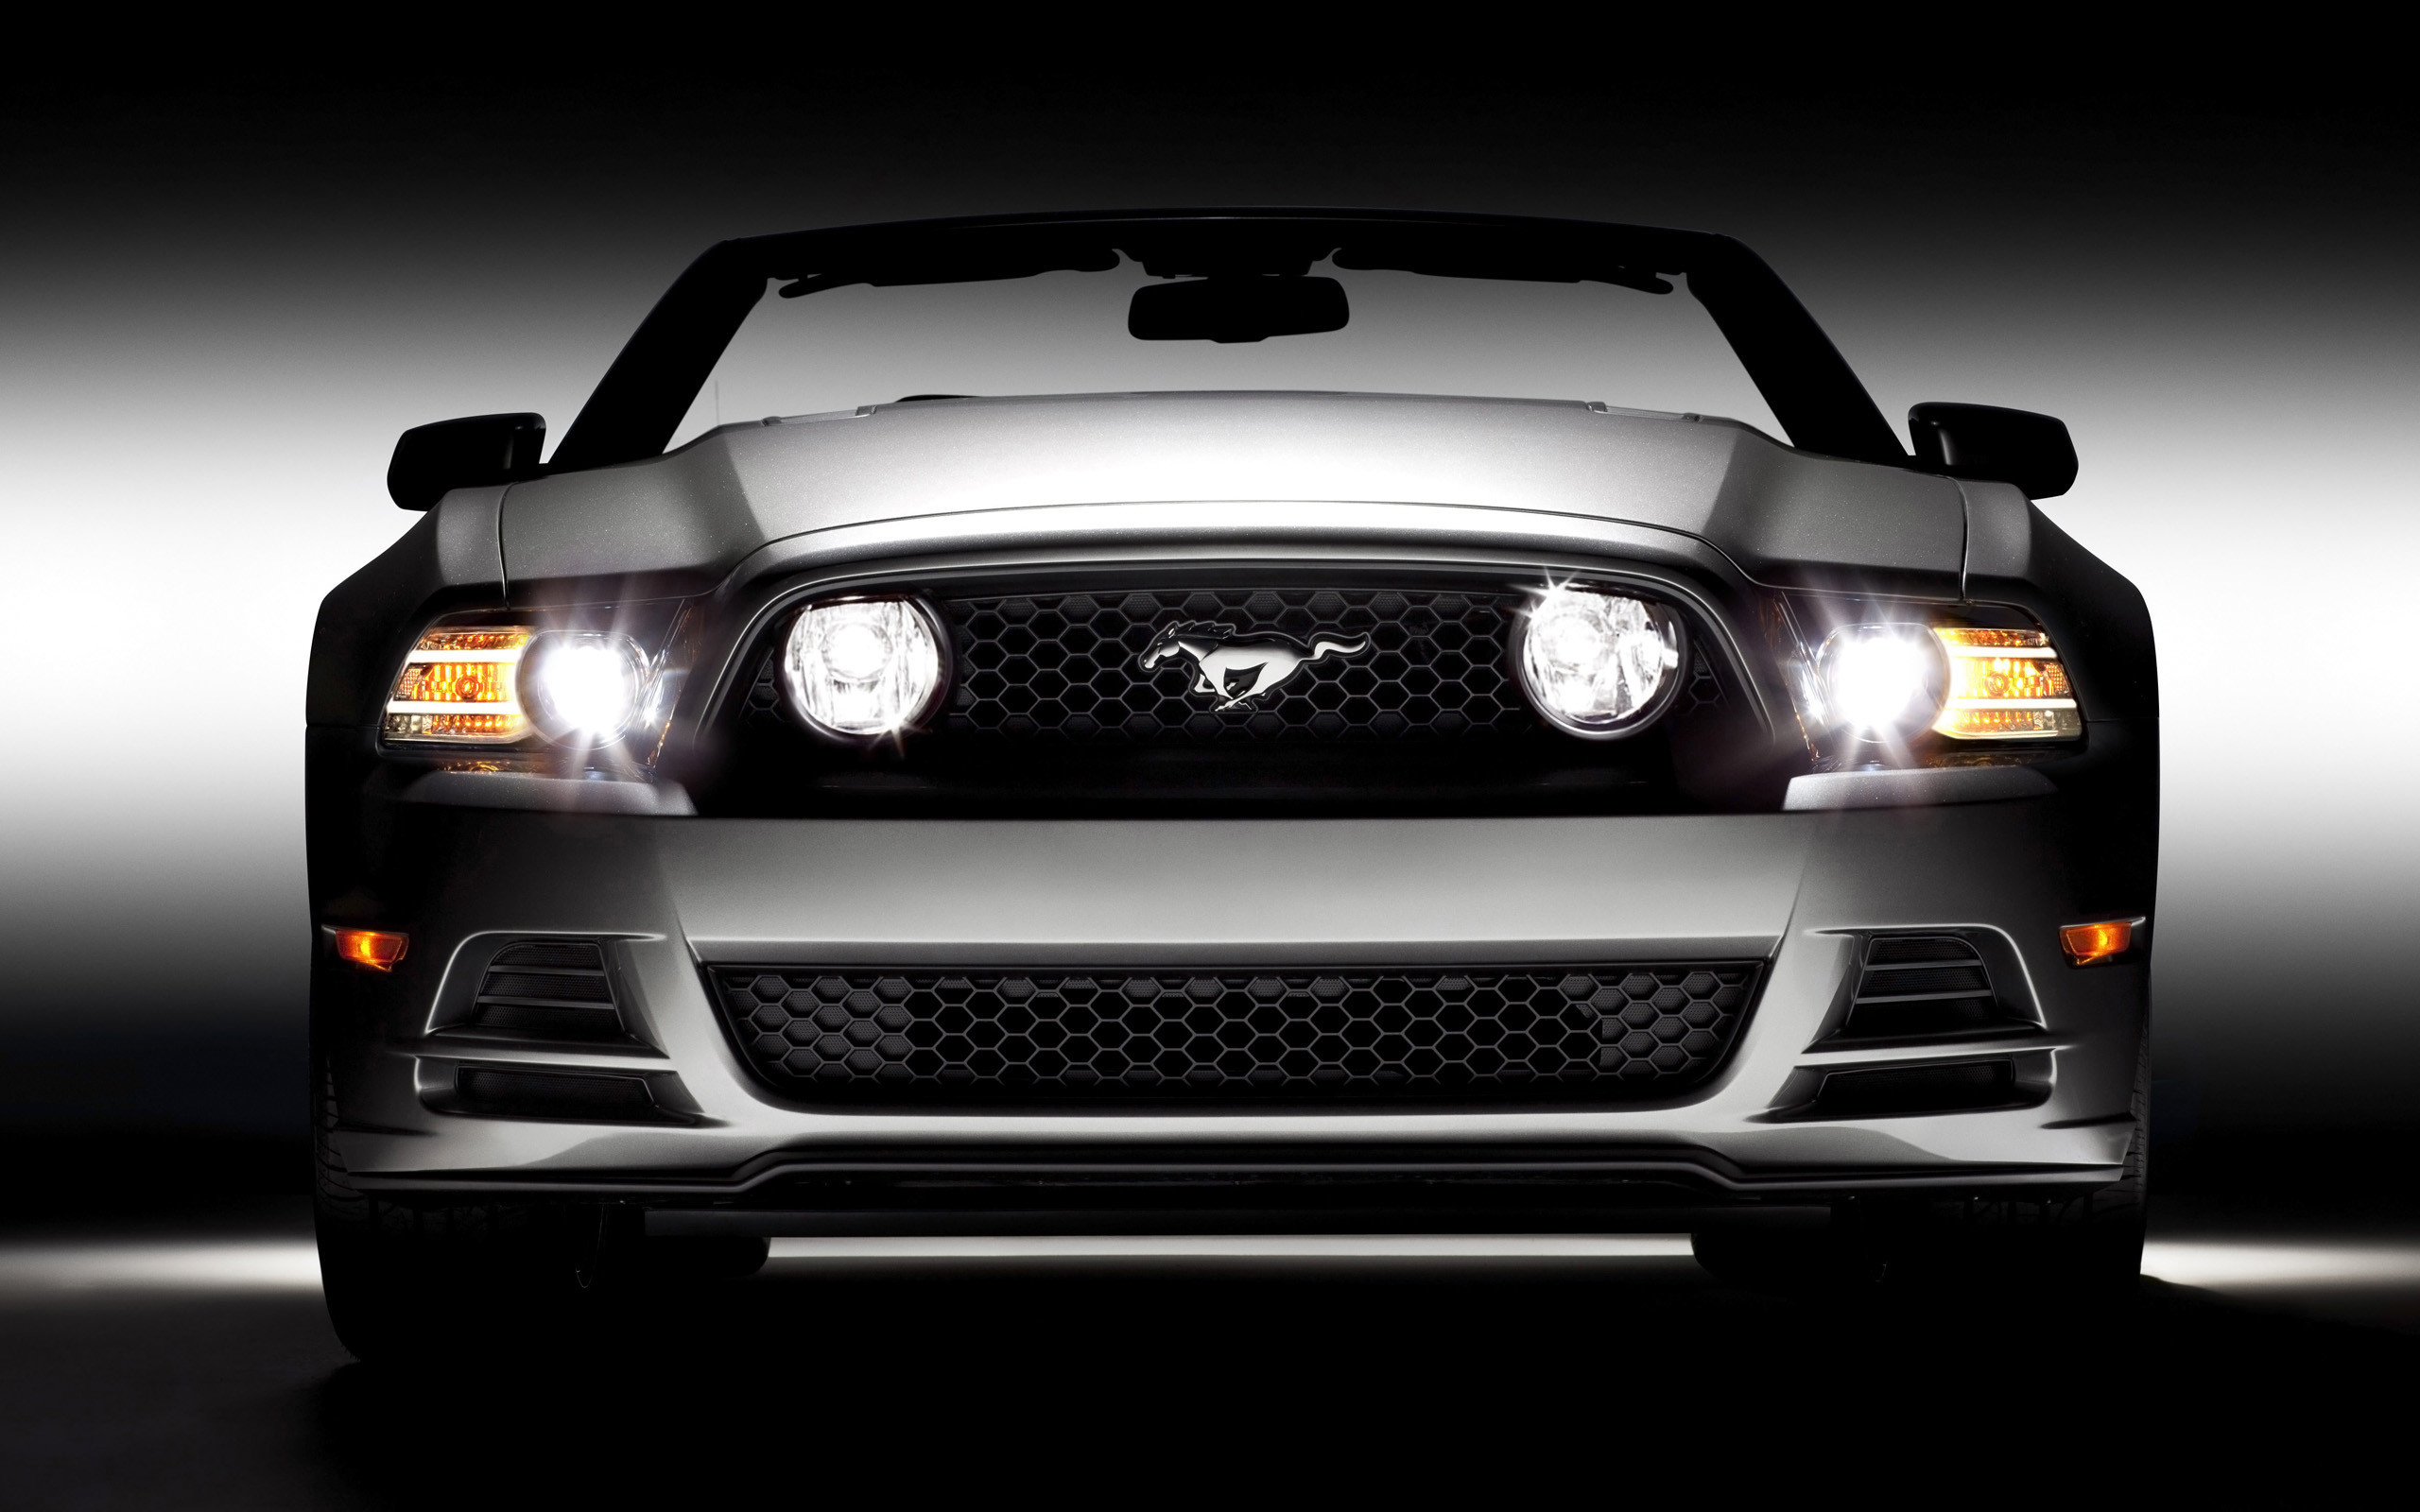 2560x1600 2014 Ford Mustang Wallpaper. Ford Mustang 2014